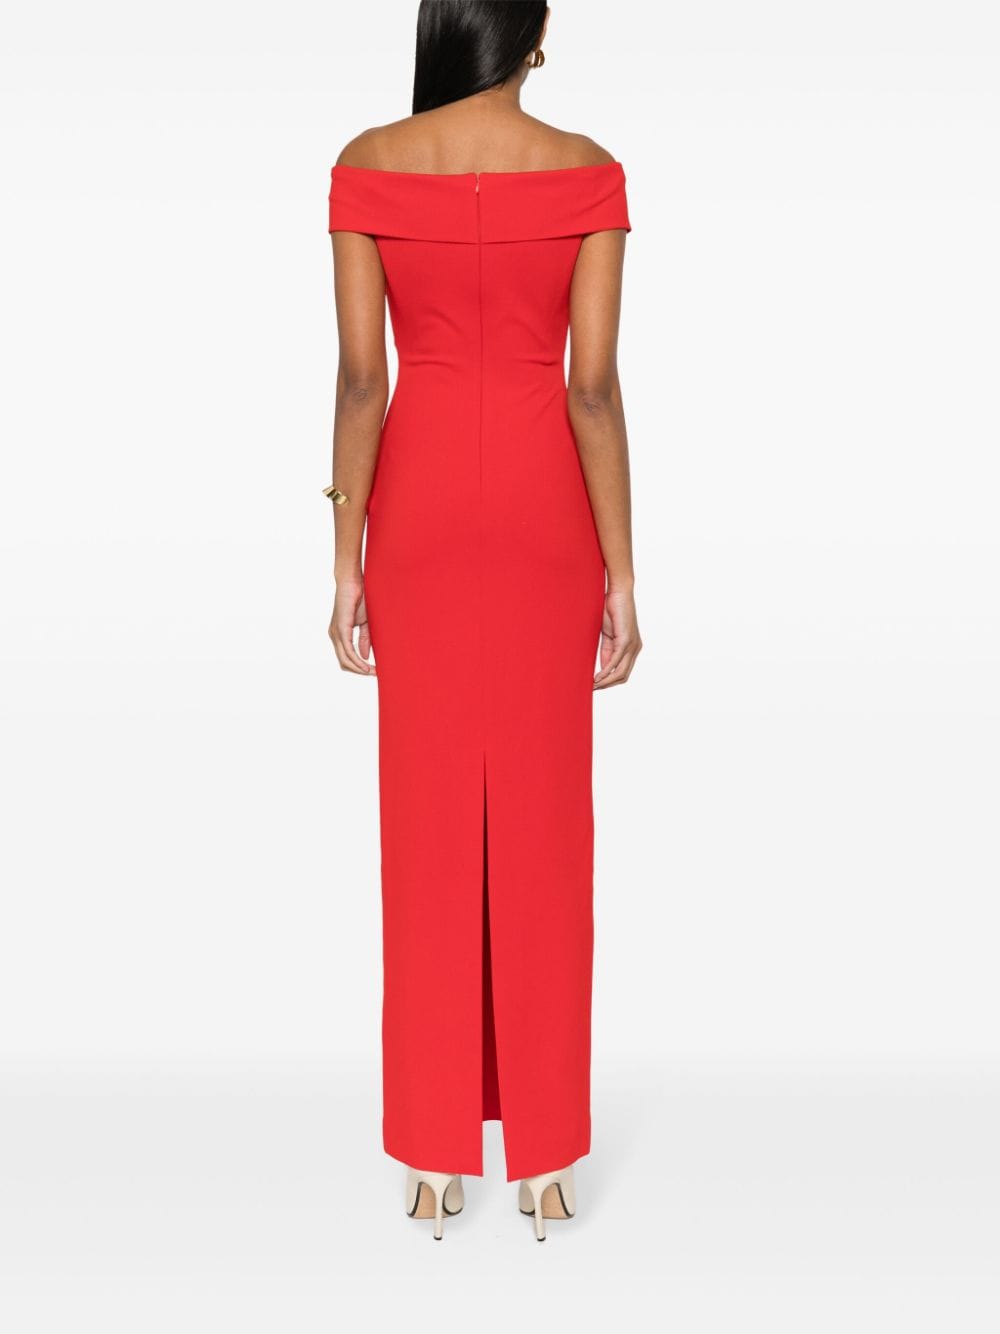 Solace London SOLACE LONDON- The Ines Maxi Dress